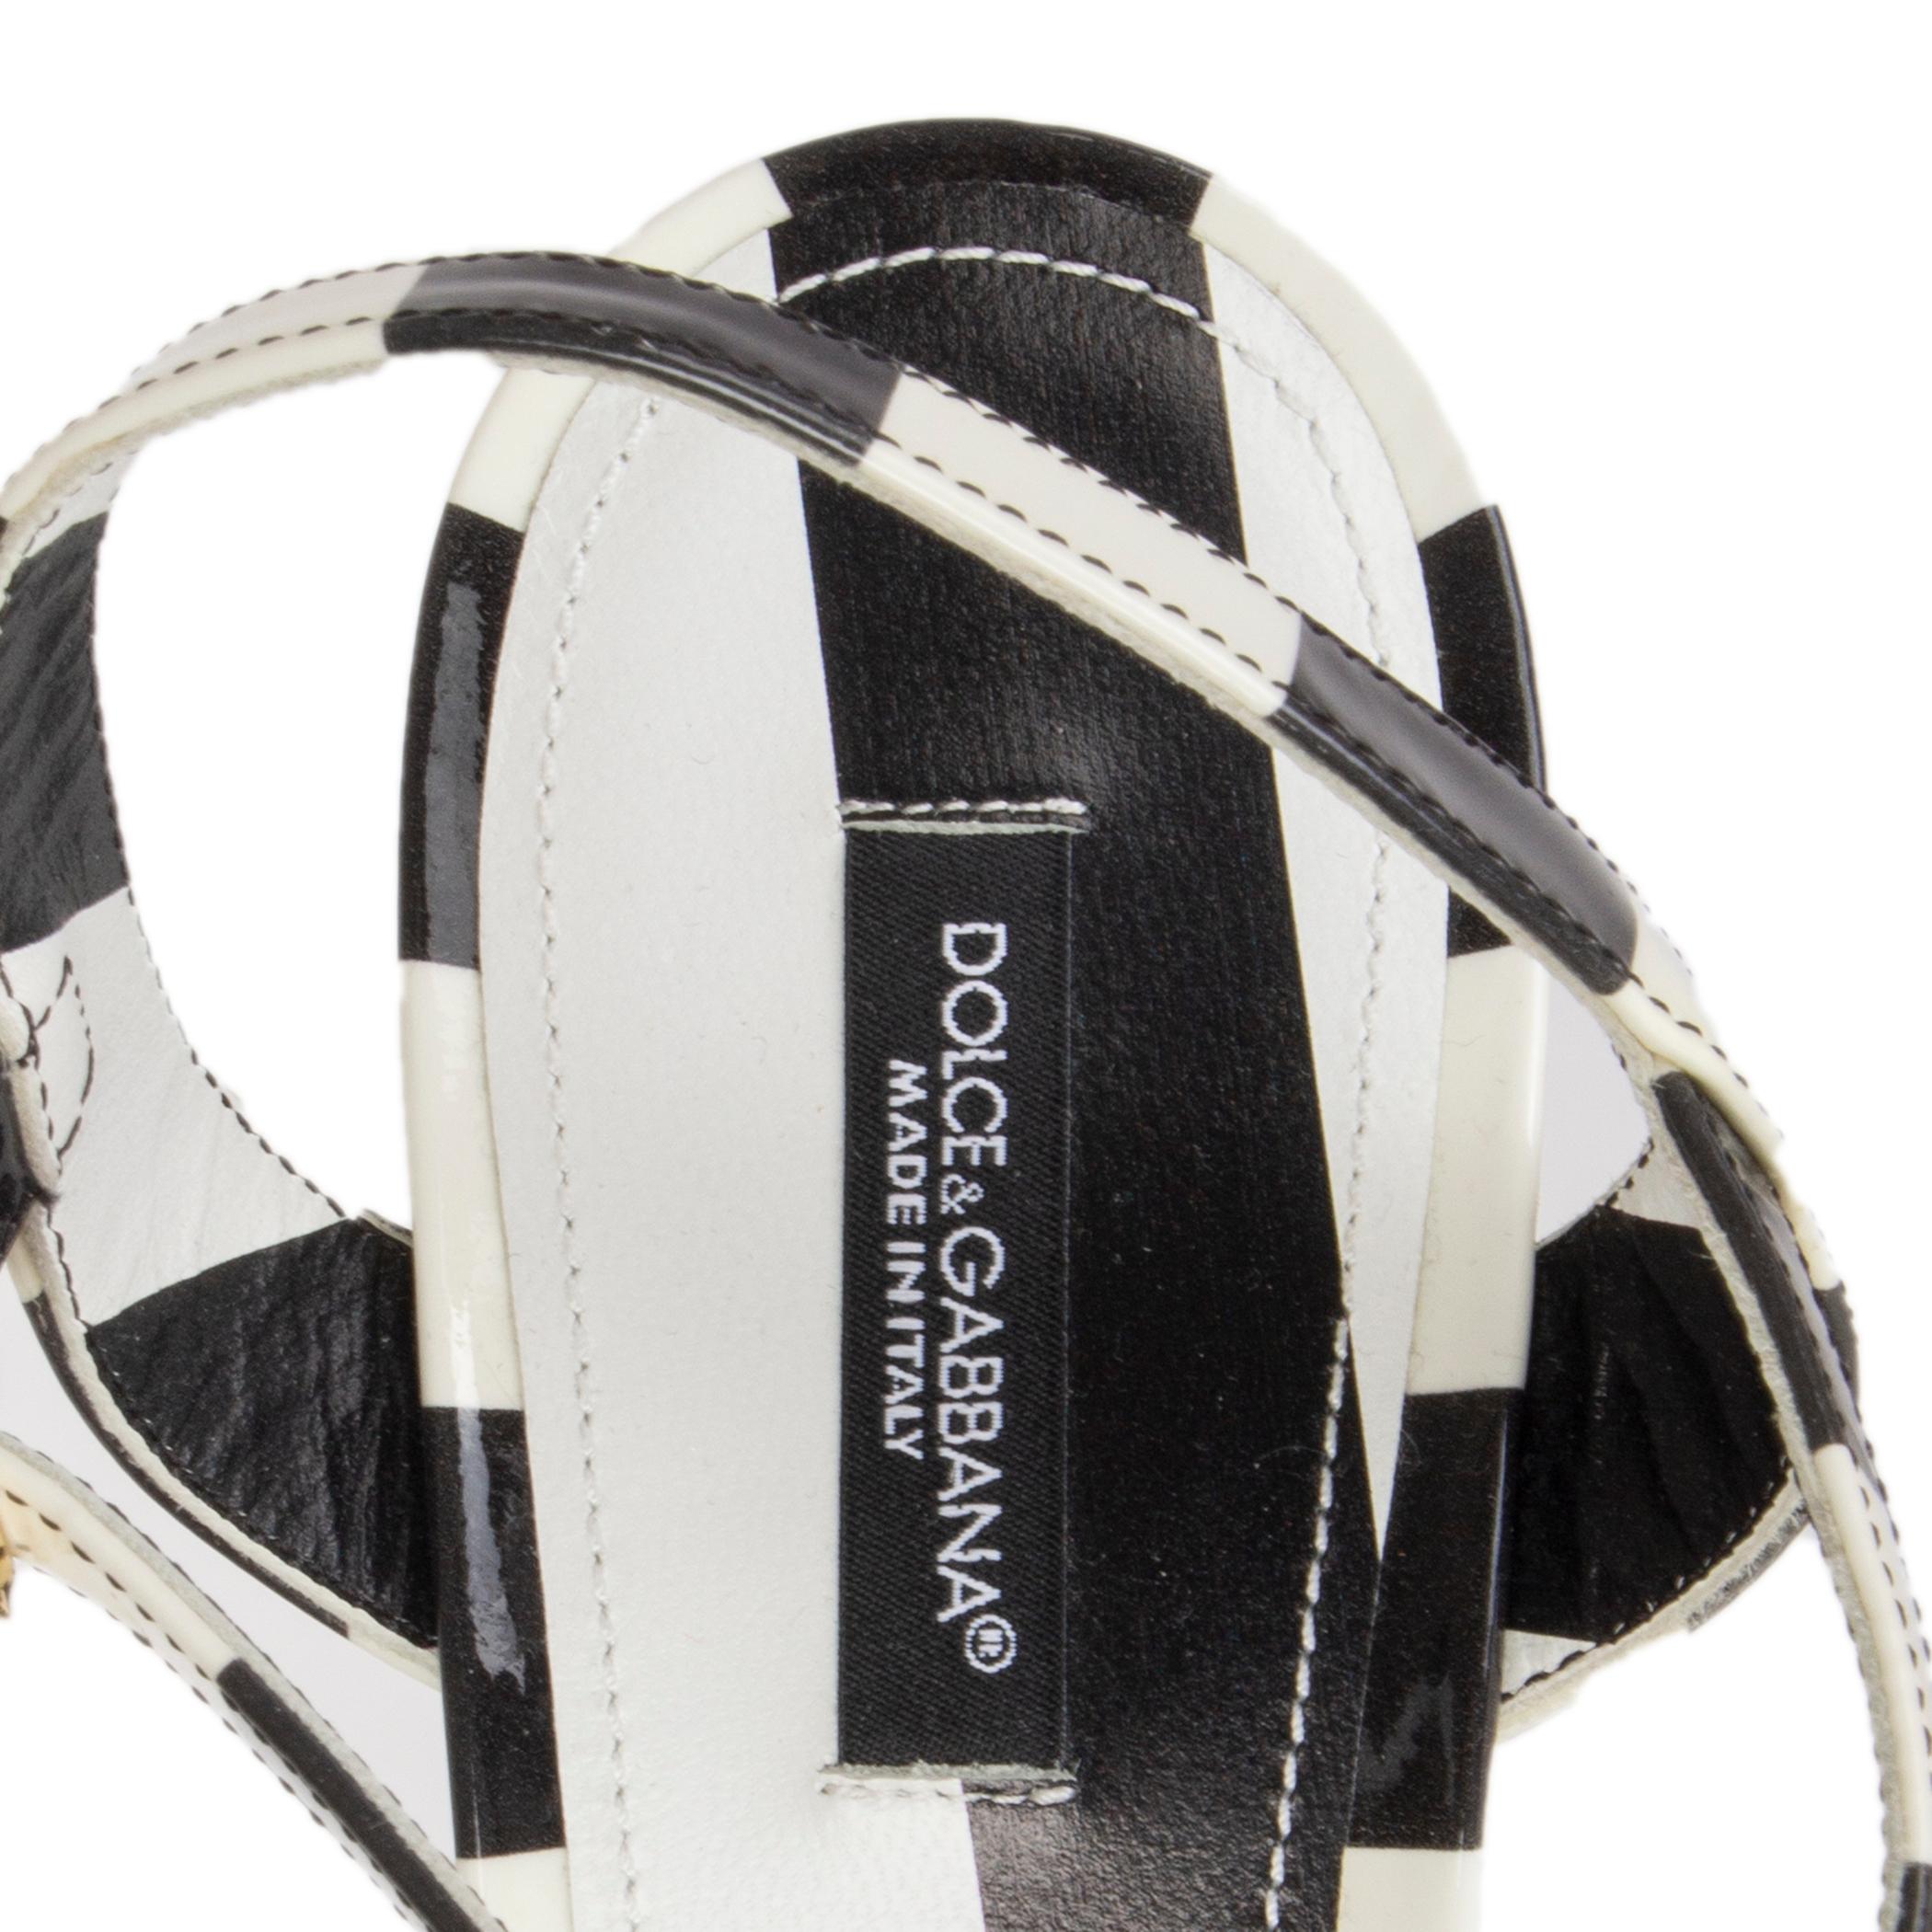 Gray DOLCE & GABBANA black & white patent STRIPED PLATFORM WEDGE Sandals Shoes 38 For Sale